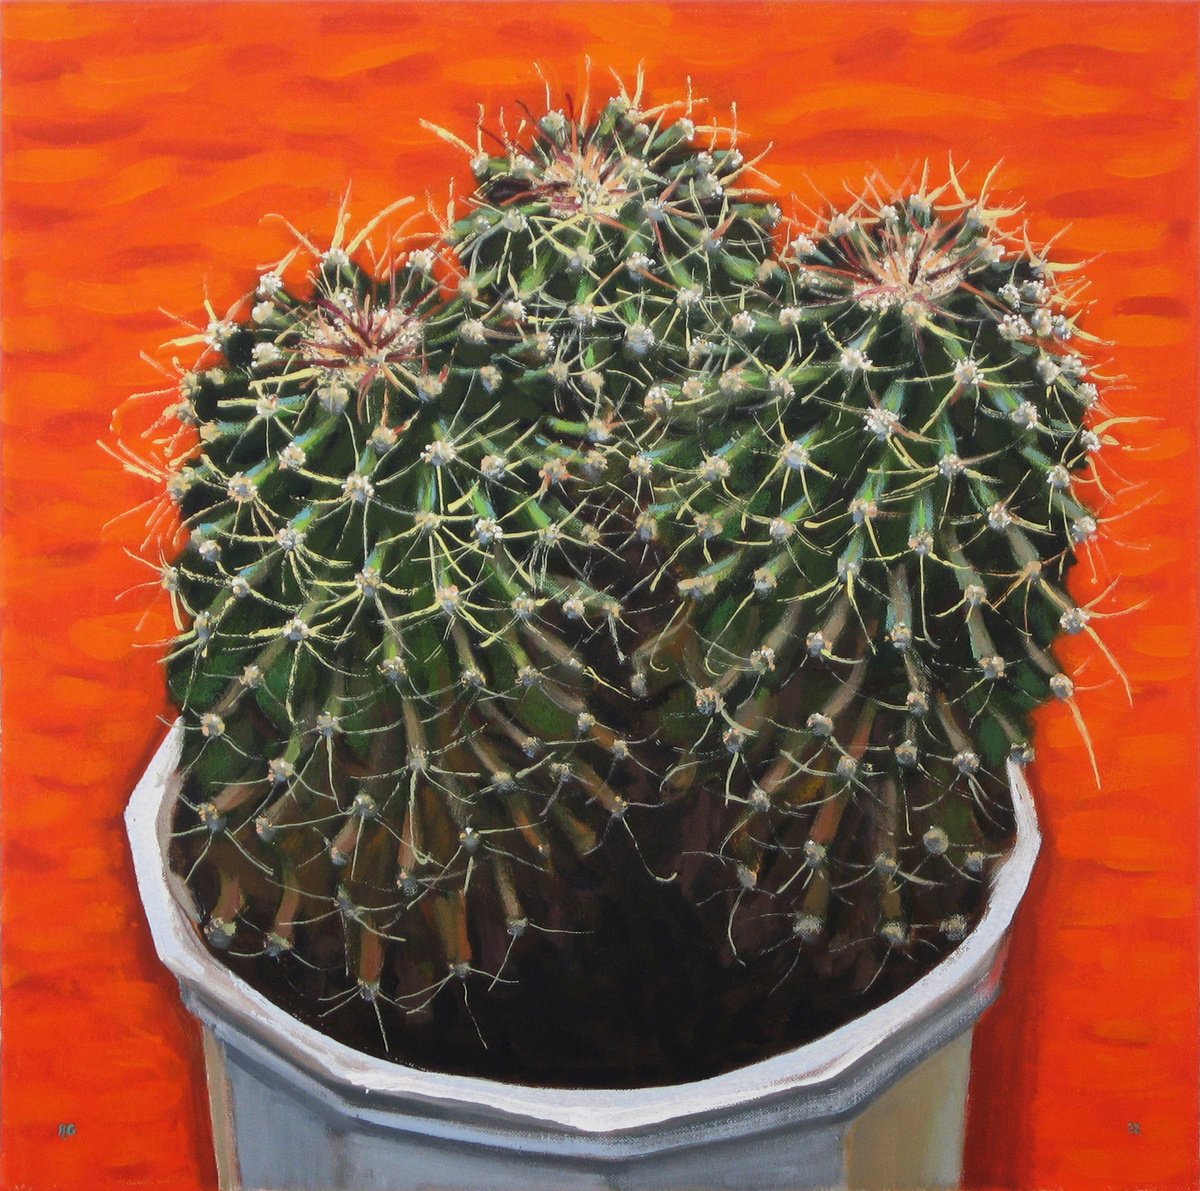 Cactus against an Orange background by Richard Gibson